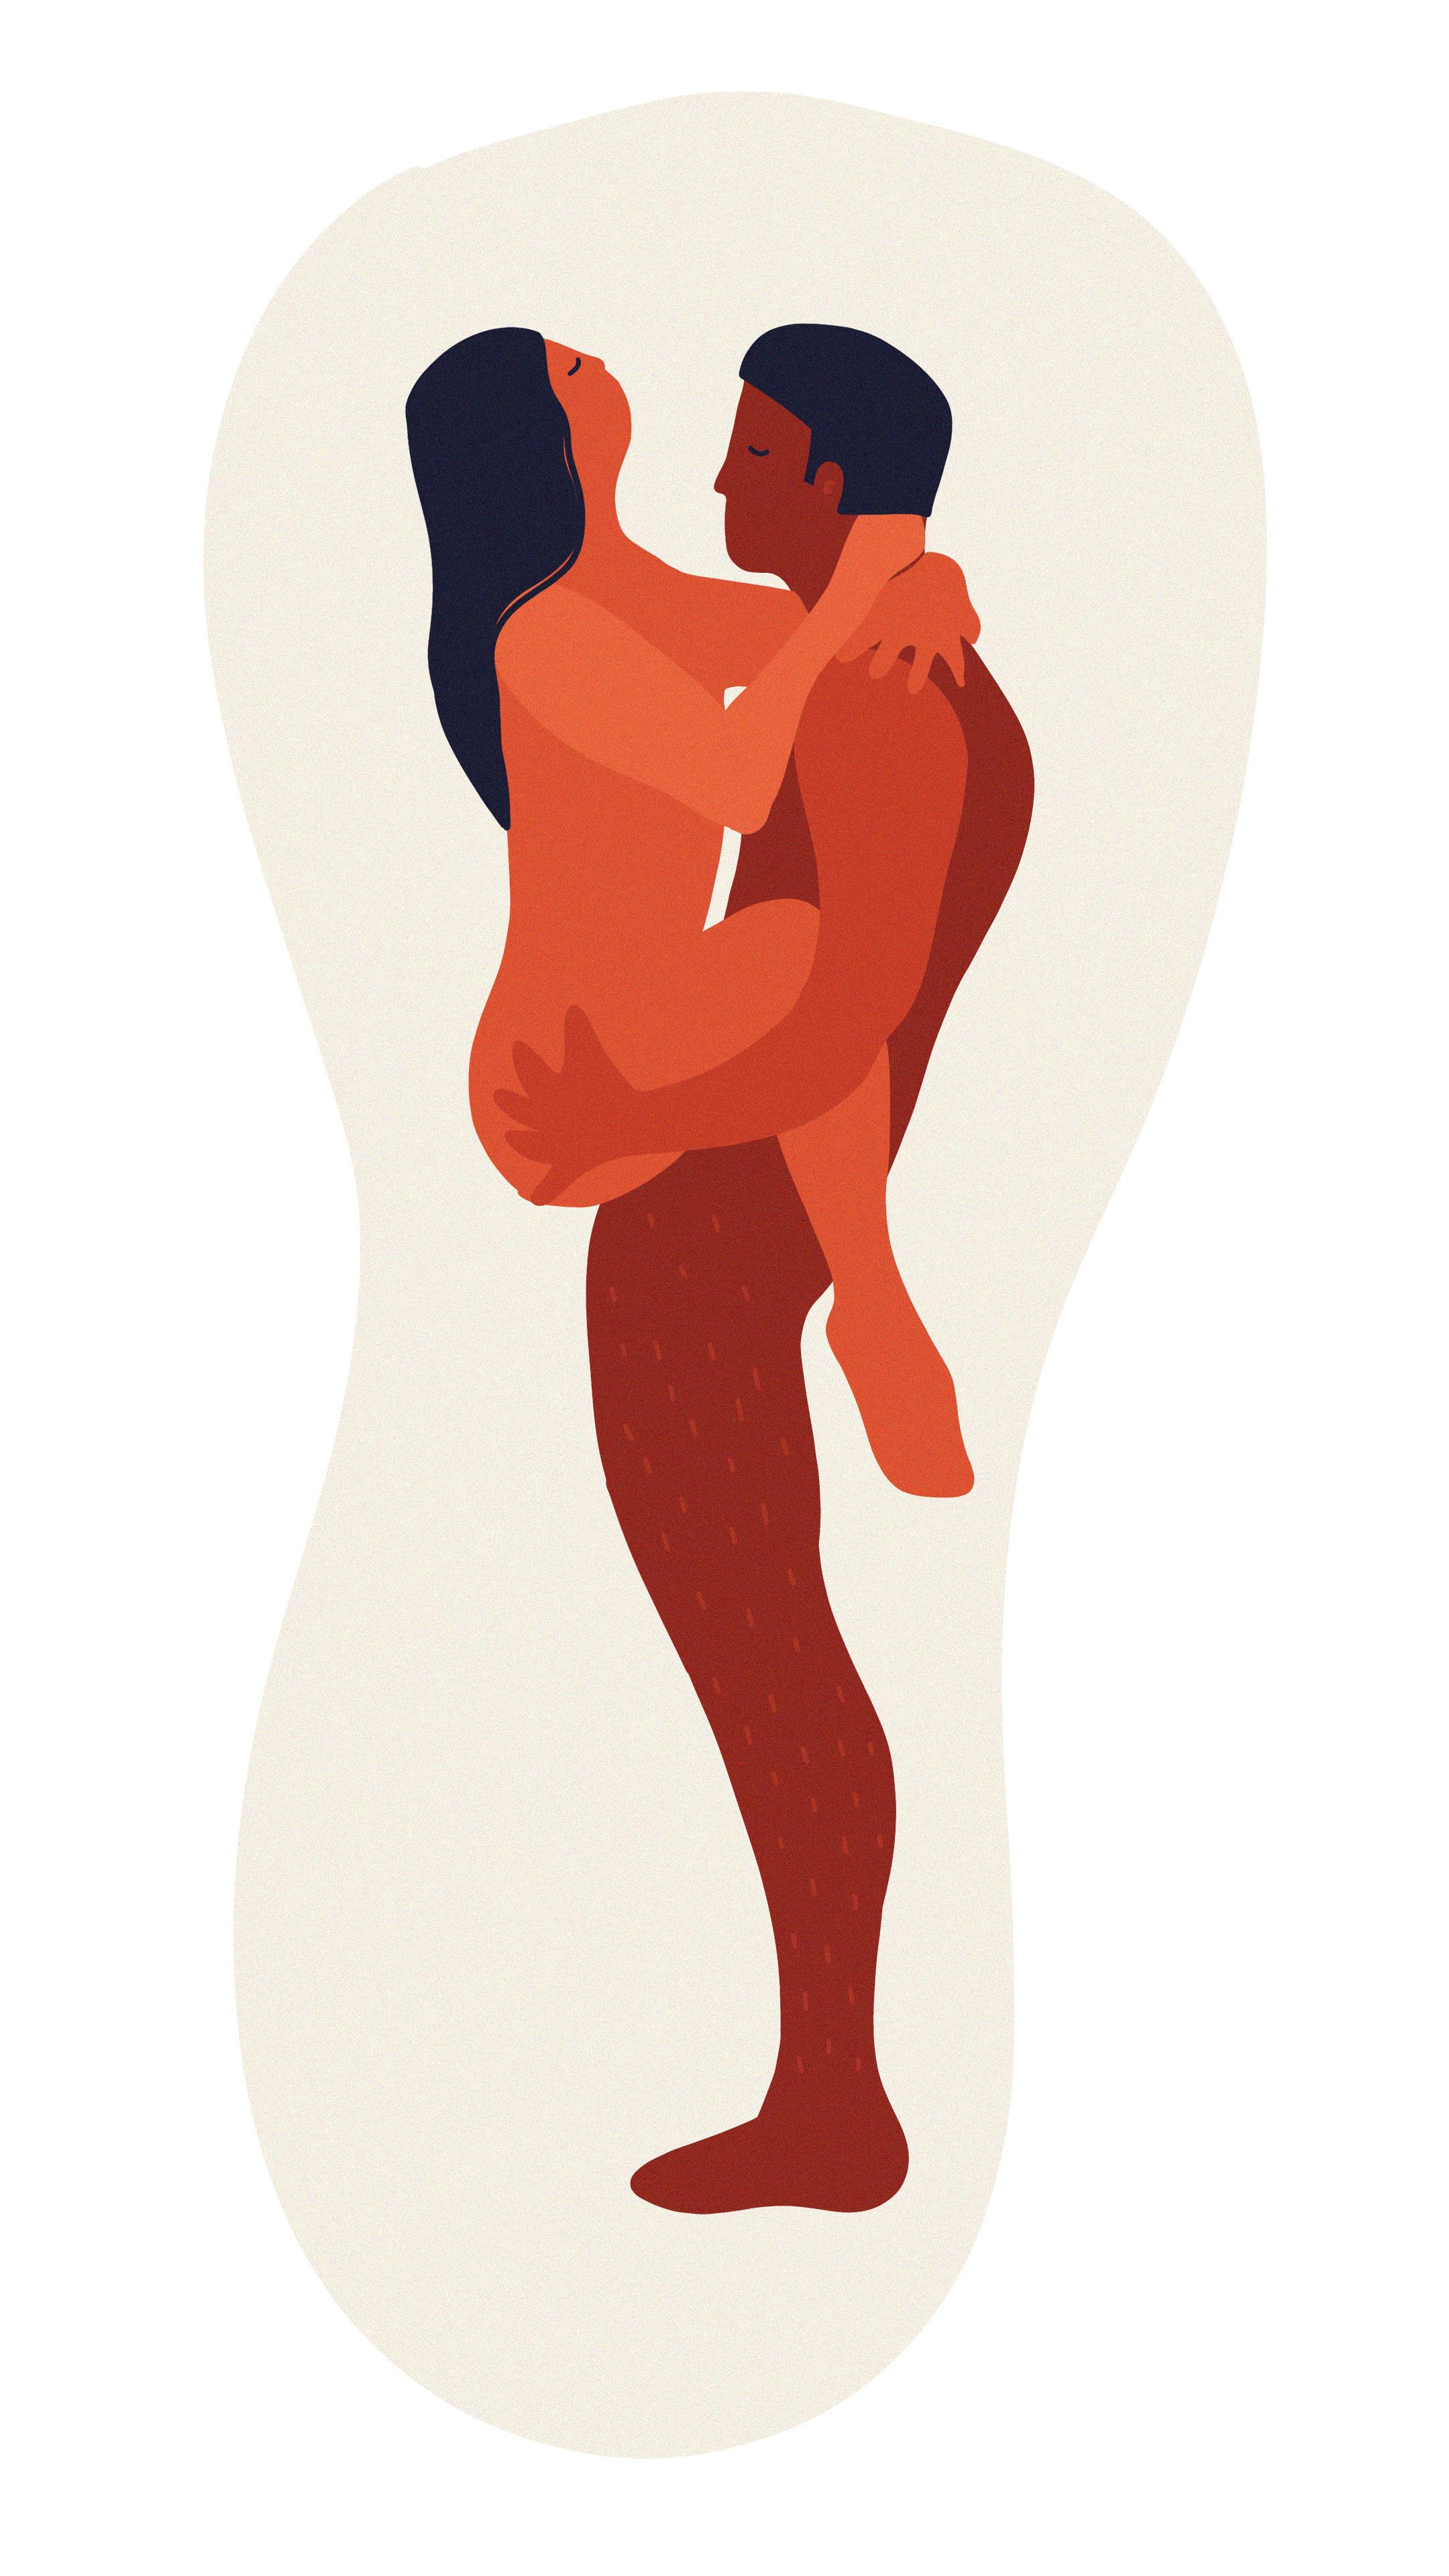 15 Kama Sutra Sex Positions That Couples Can Easily Pull pic